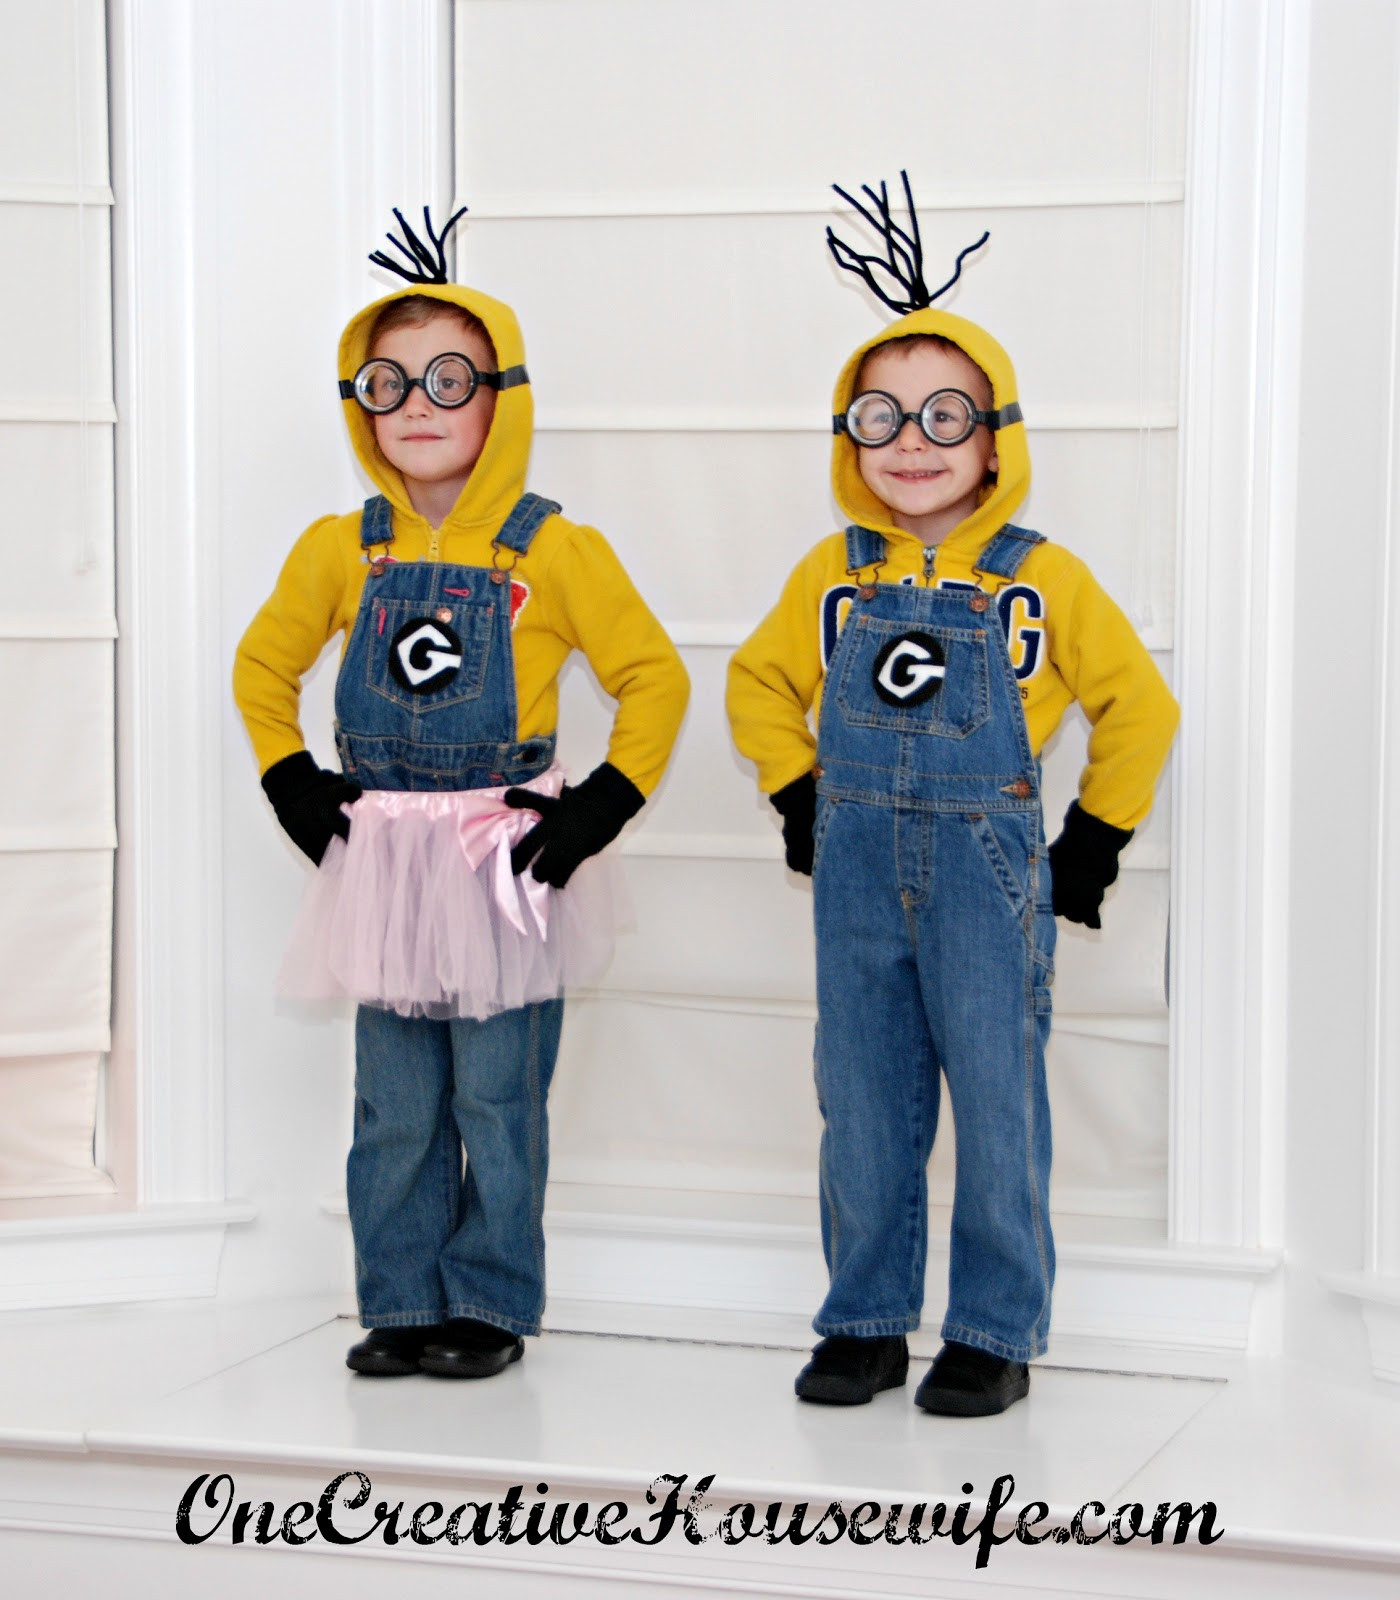 DIY Minion Costume Without Overalls
 e Creative Housewife Despicable Me Minion Costumes